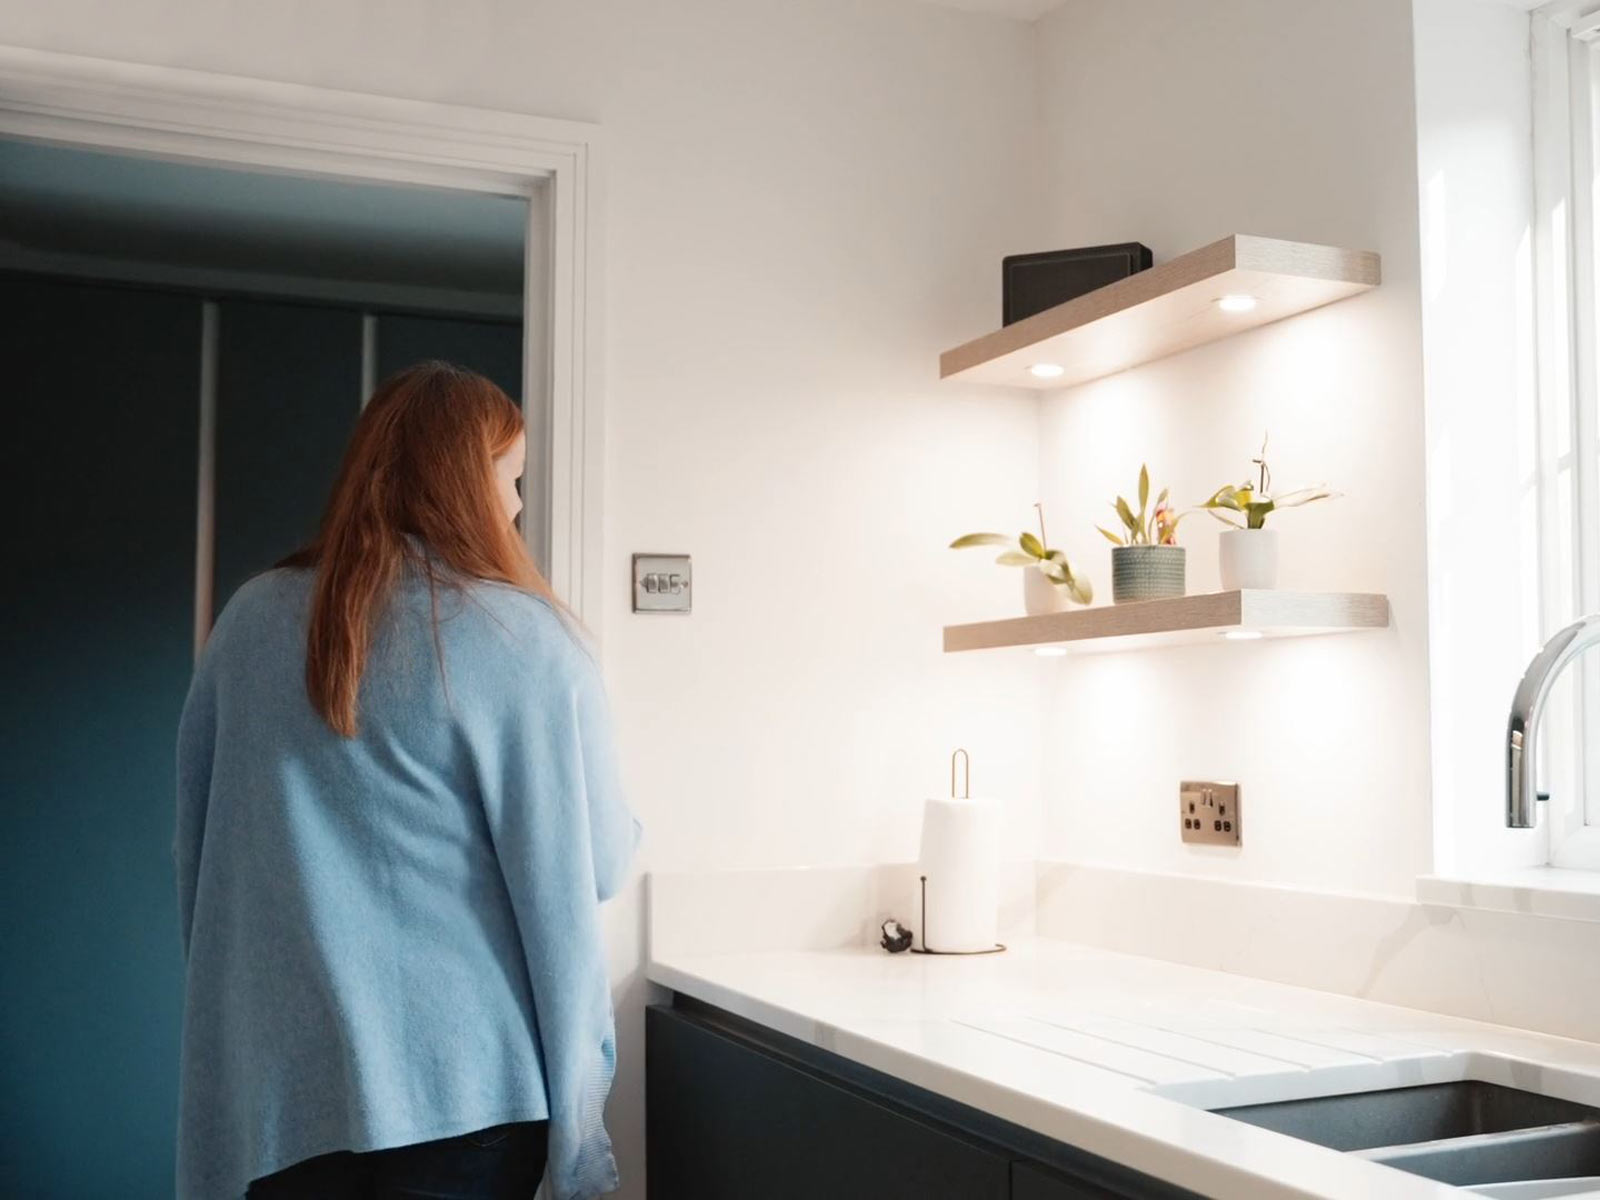 Lisa passing floating oak shelves with lighting to show off her utility room design